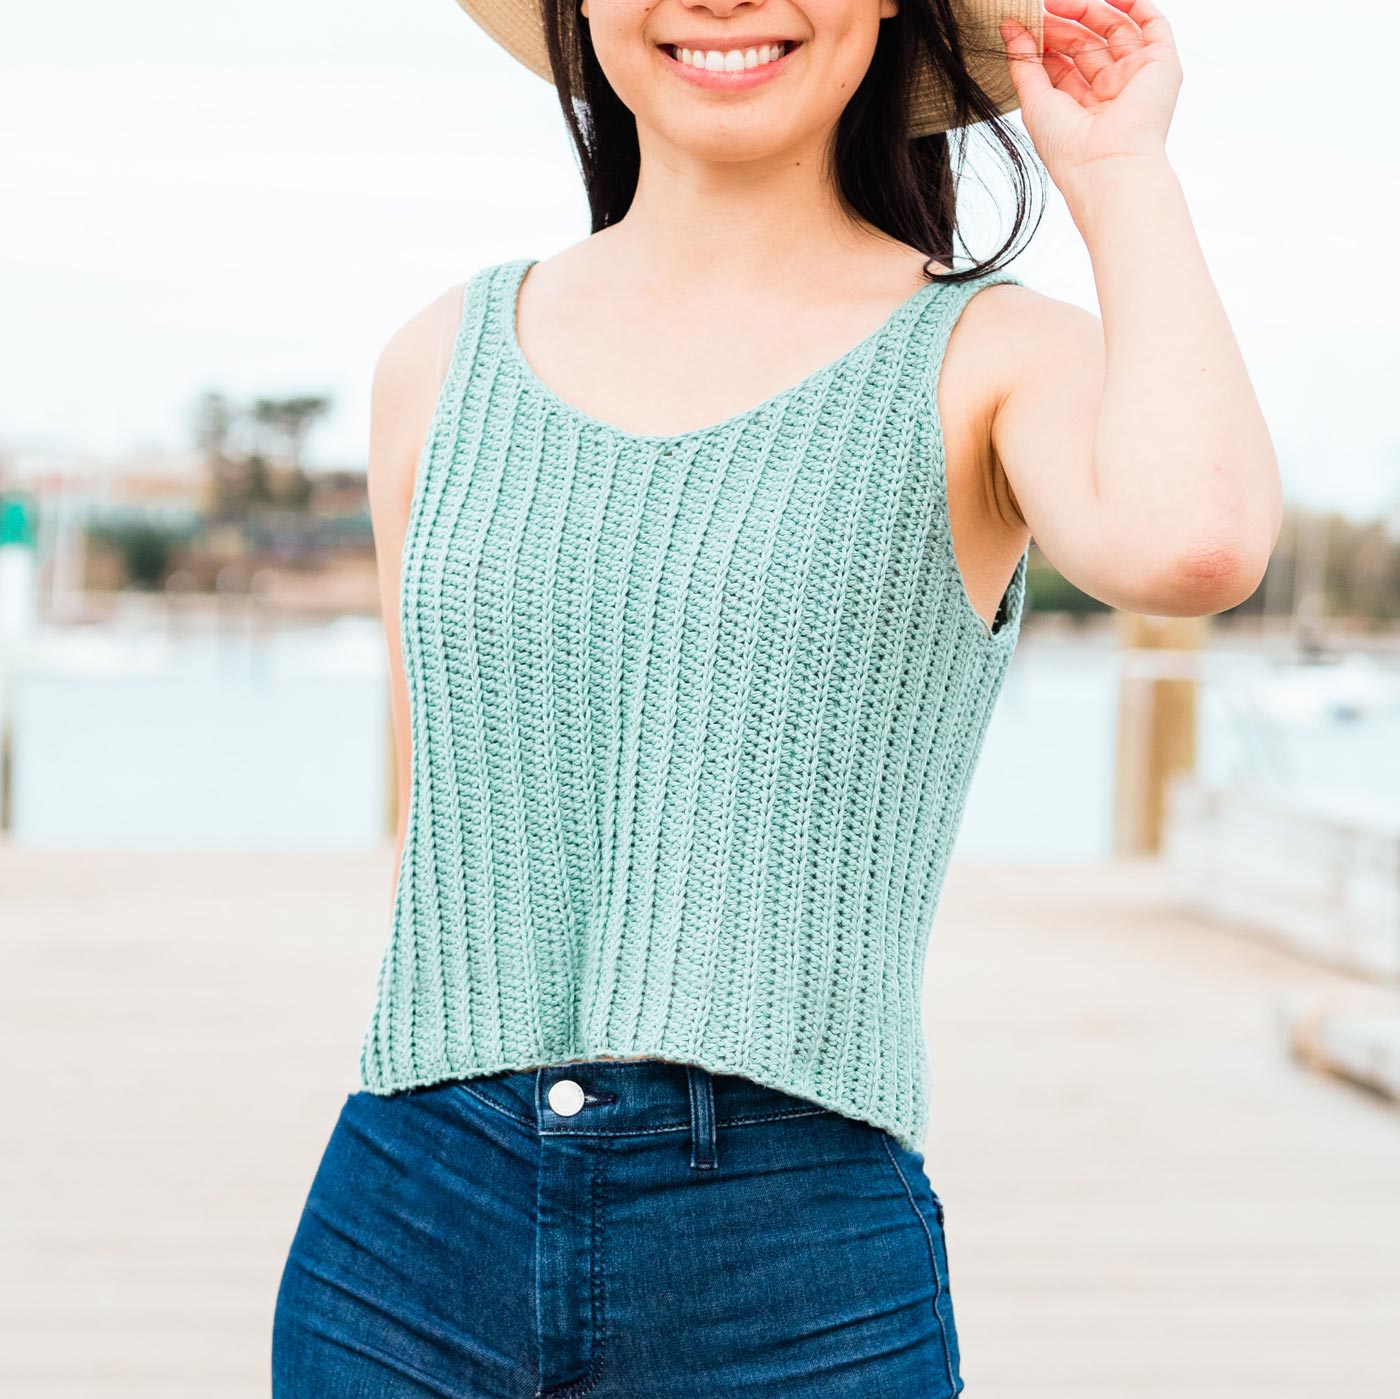 Crochet Ribbed Tank Top - free pattern + video tutorial - For The